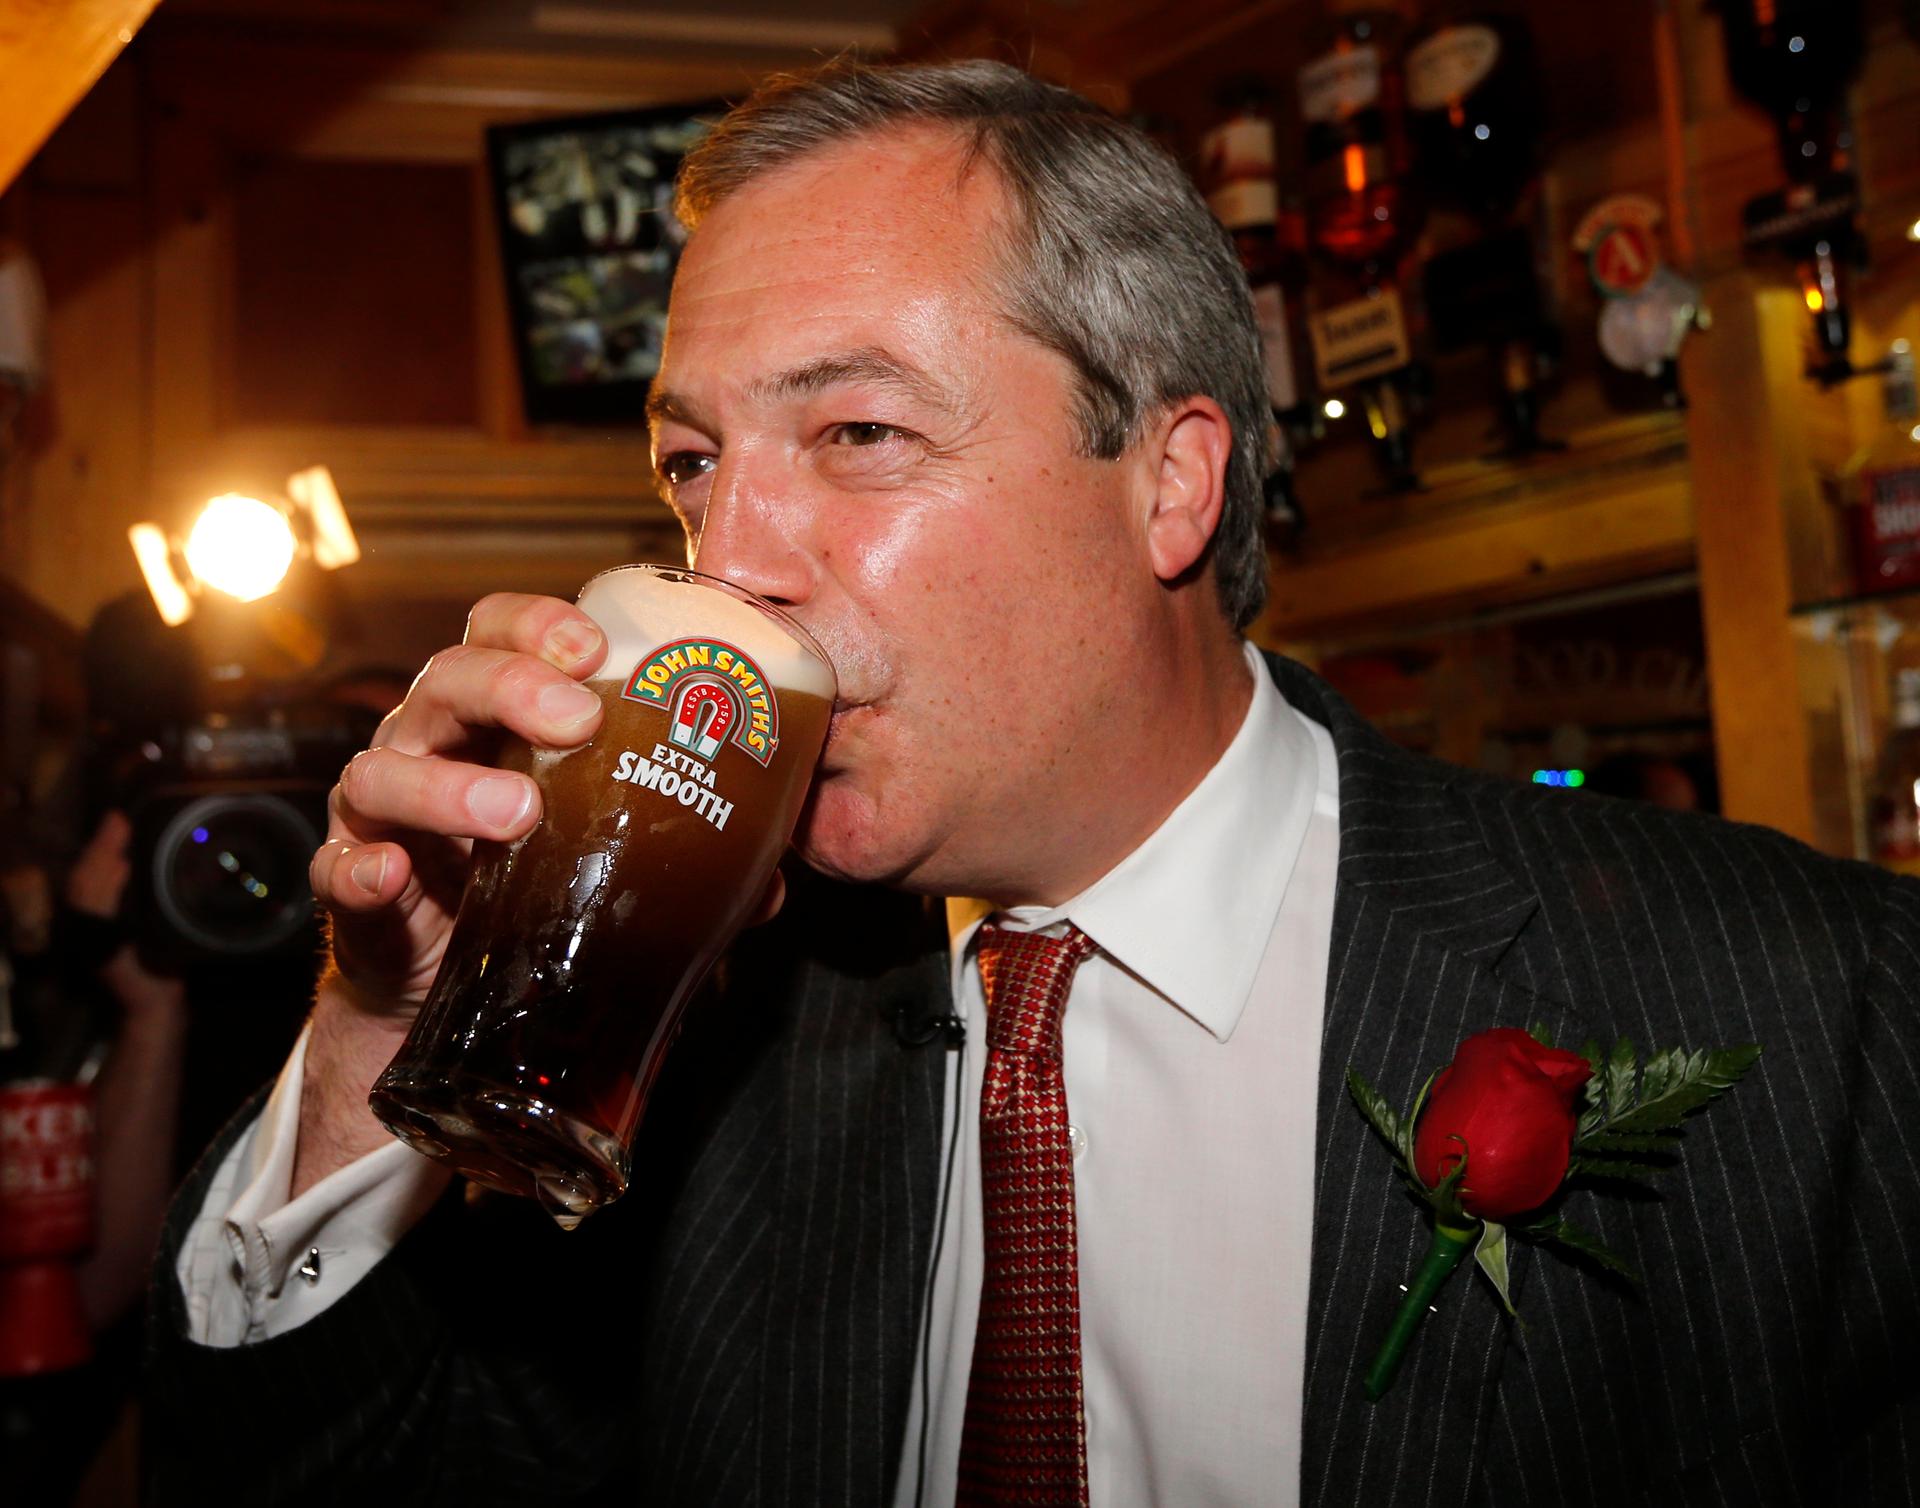 United Kingdom Independence Party (UKIP) leader Nigel Farage enjoys a pint of beer during a visit to mark St George's day at the Northwood Club in Ramsgate, southern England, April 23, 2015